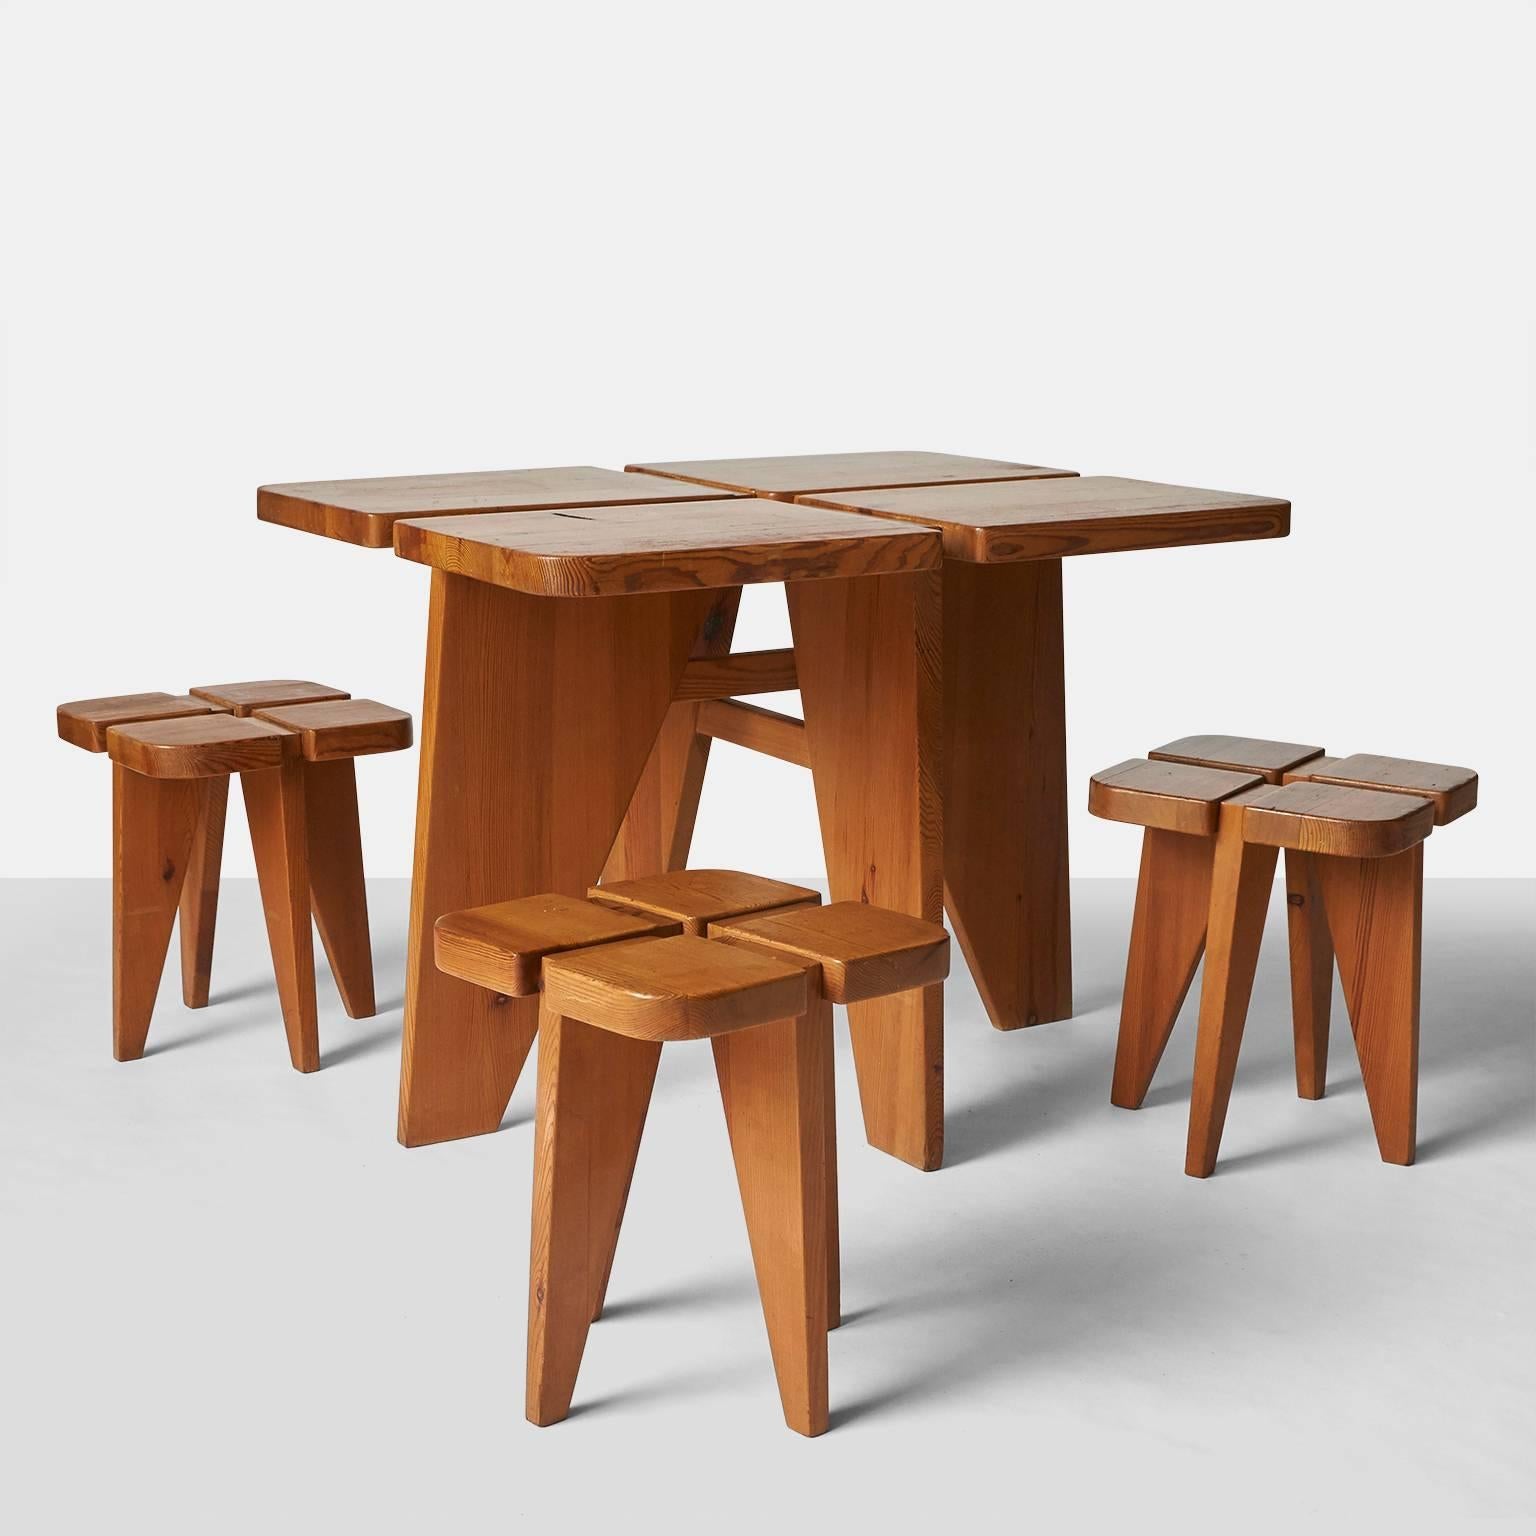 A dining table and four stools in pine, by Lisa Johansson-Pape for Stockman Orno, Finland, 1960s.
Each stool measures 14